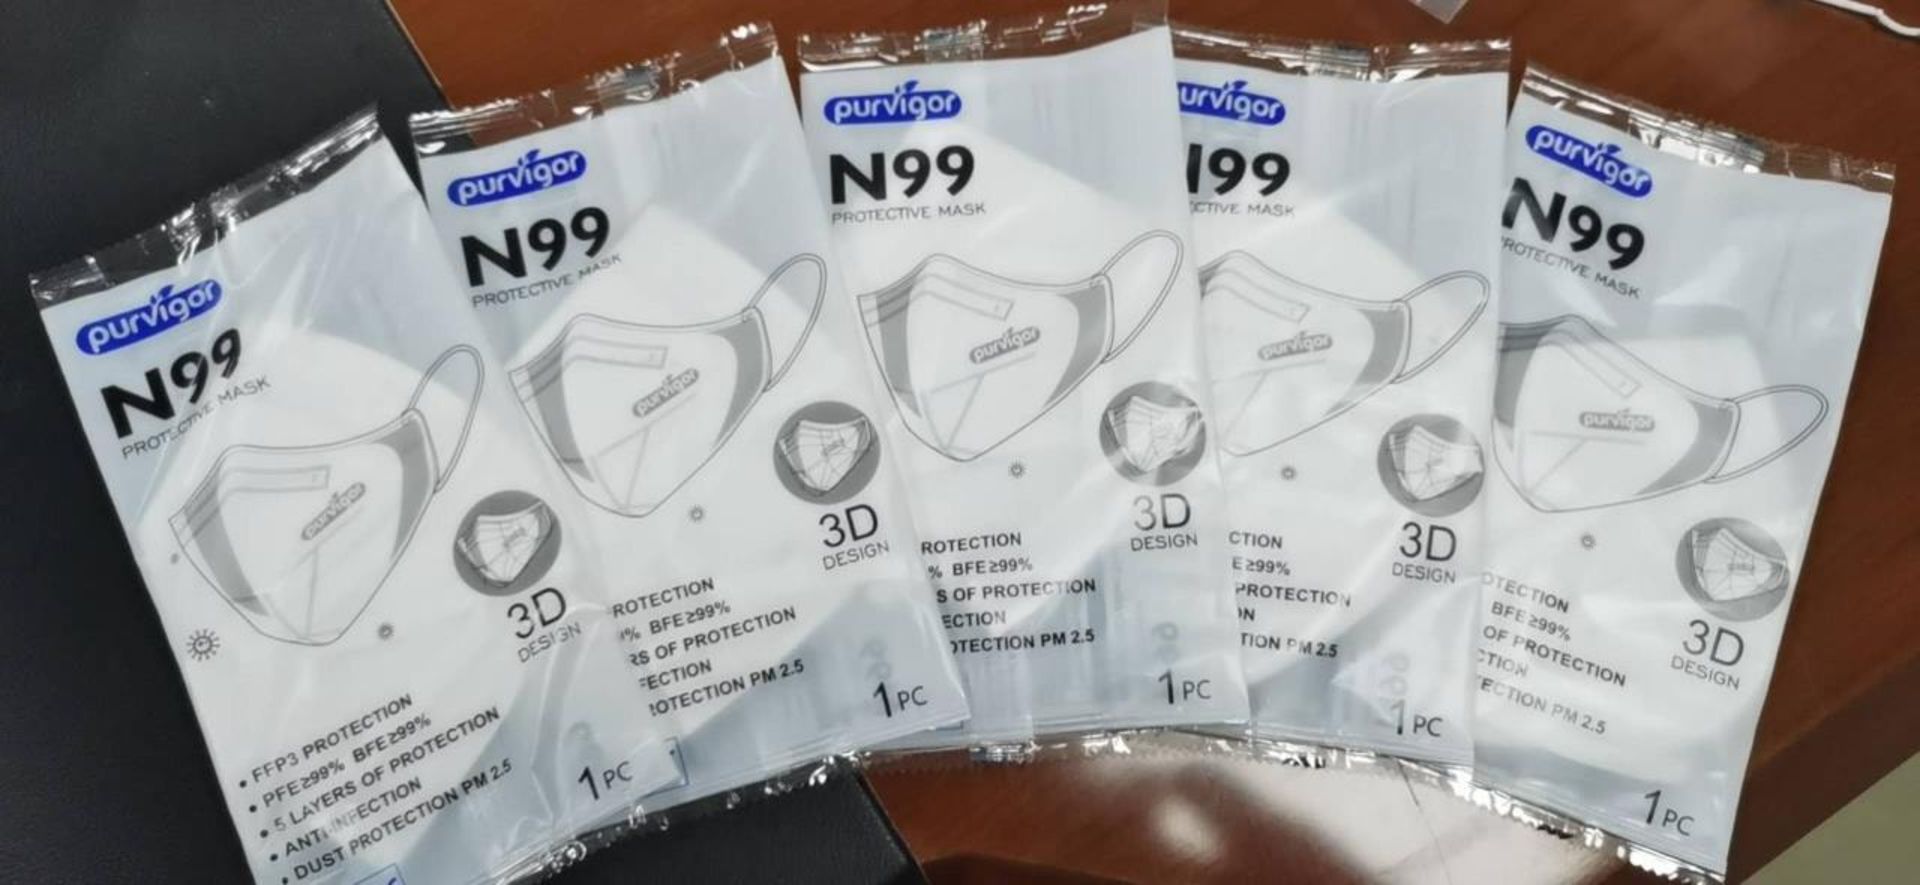 Lot of 250 x Masks. Packaged and labelled as N99 FFP3 Masks. Selling online for £7-£9